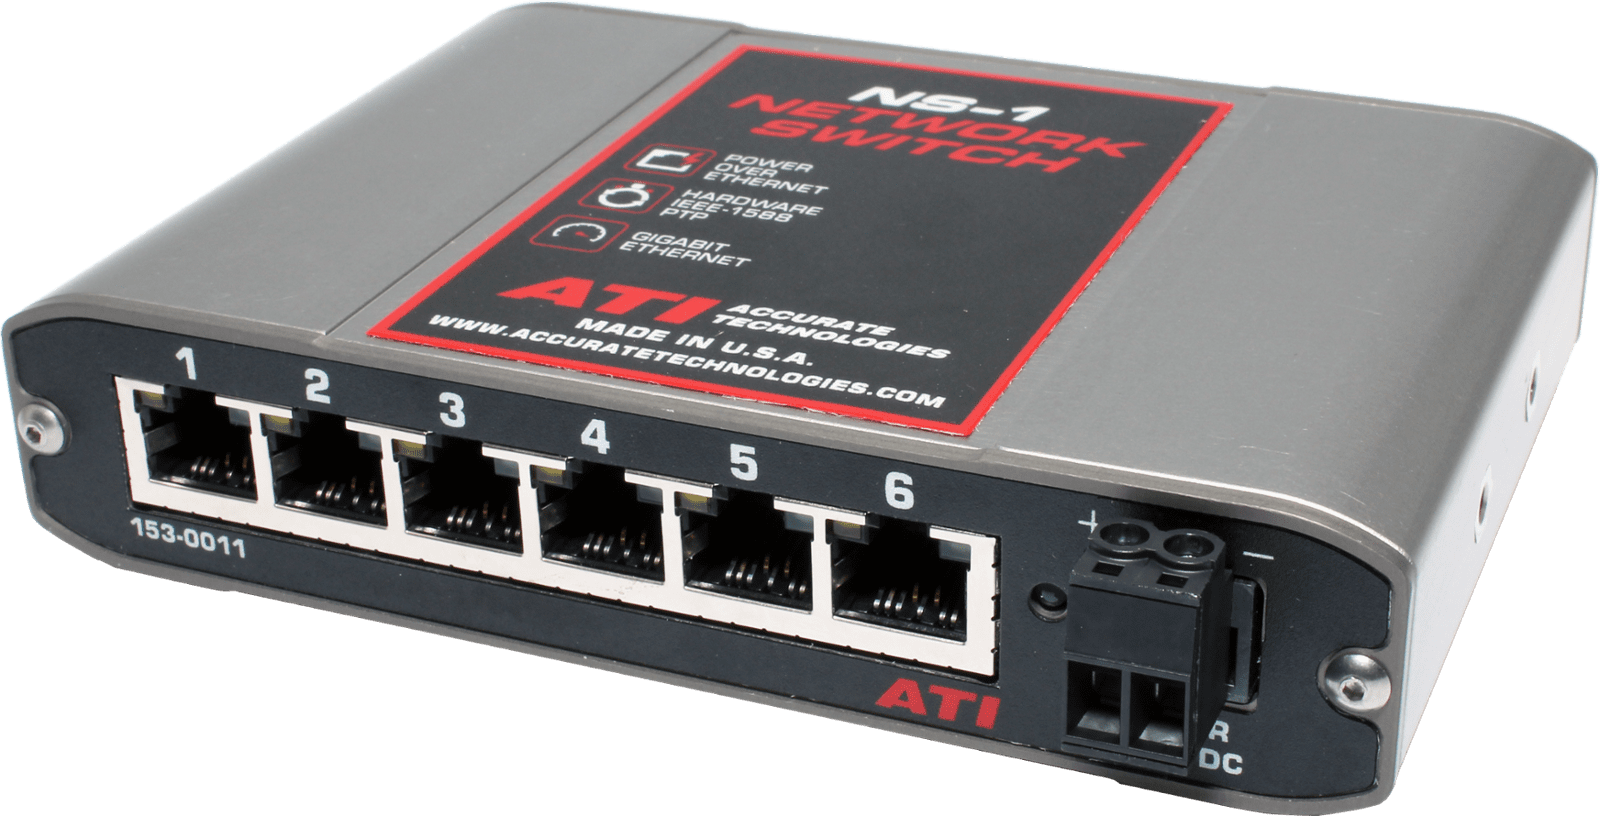 NS-1 Network Switch